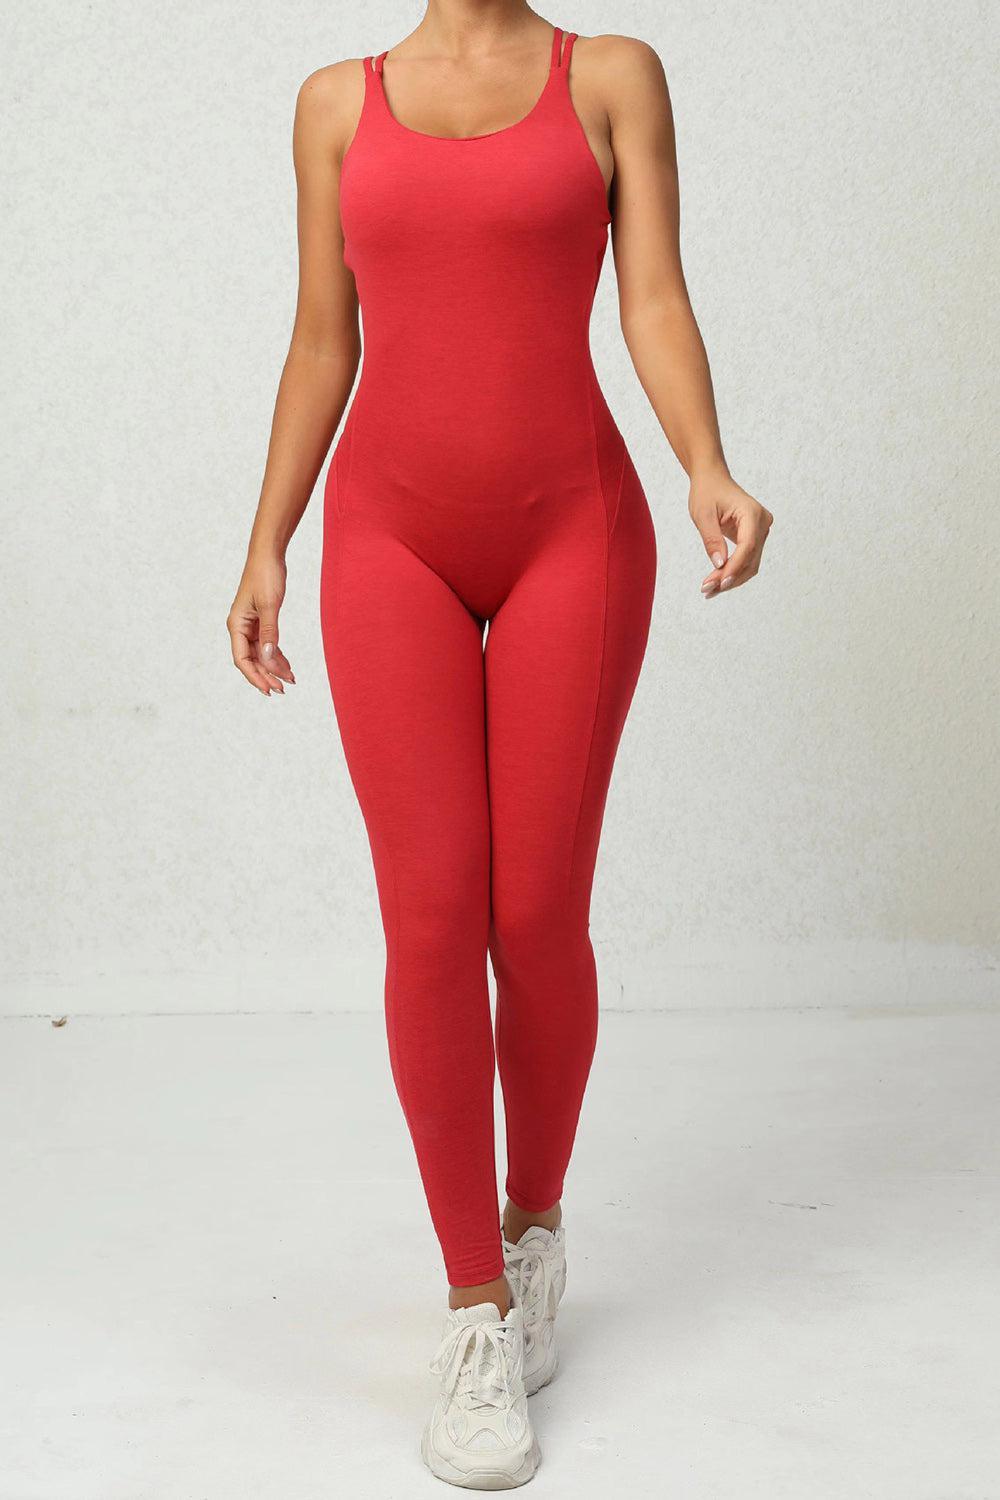 a woman wearing a red bodysuit and white tennis shoes